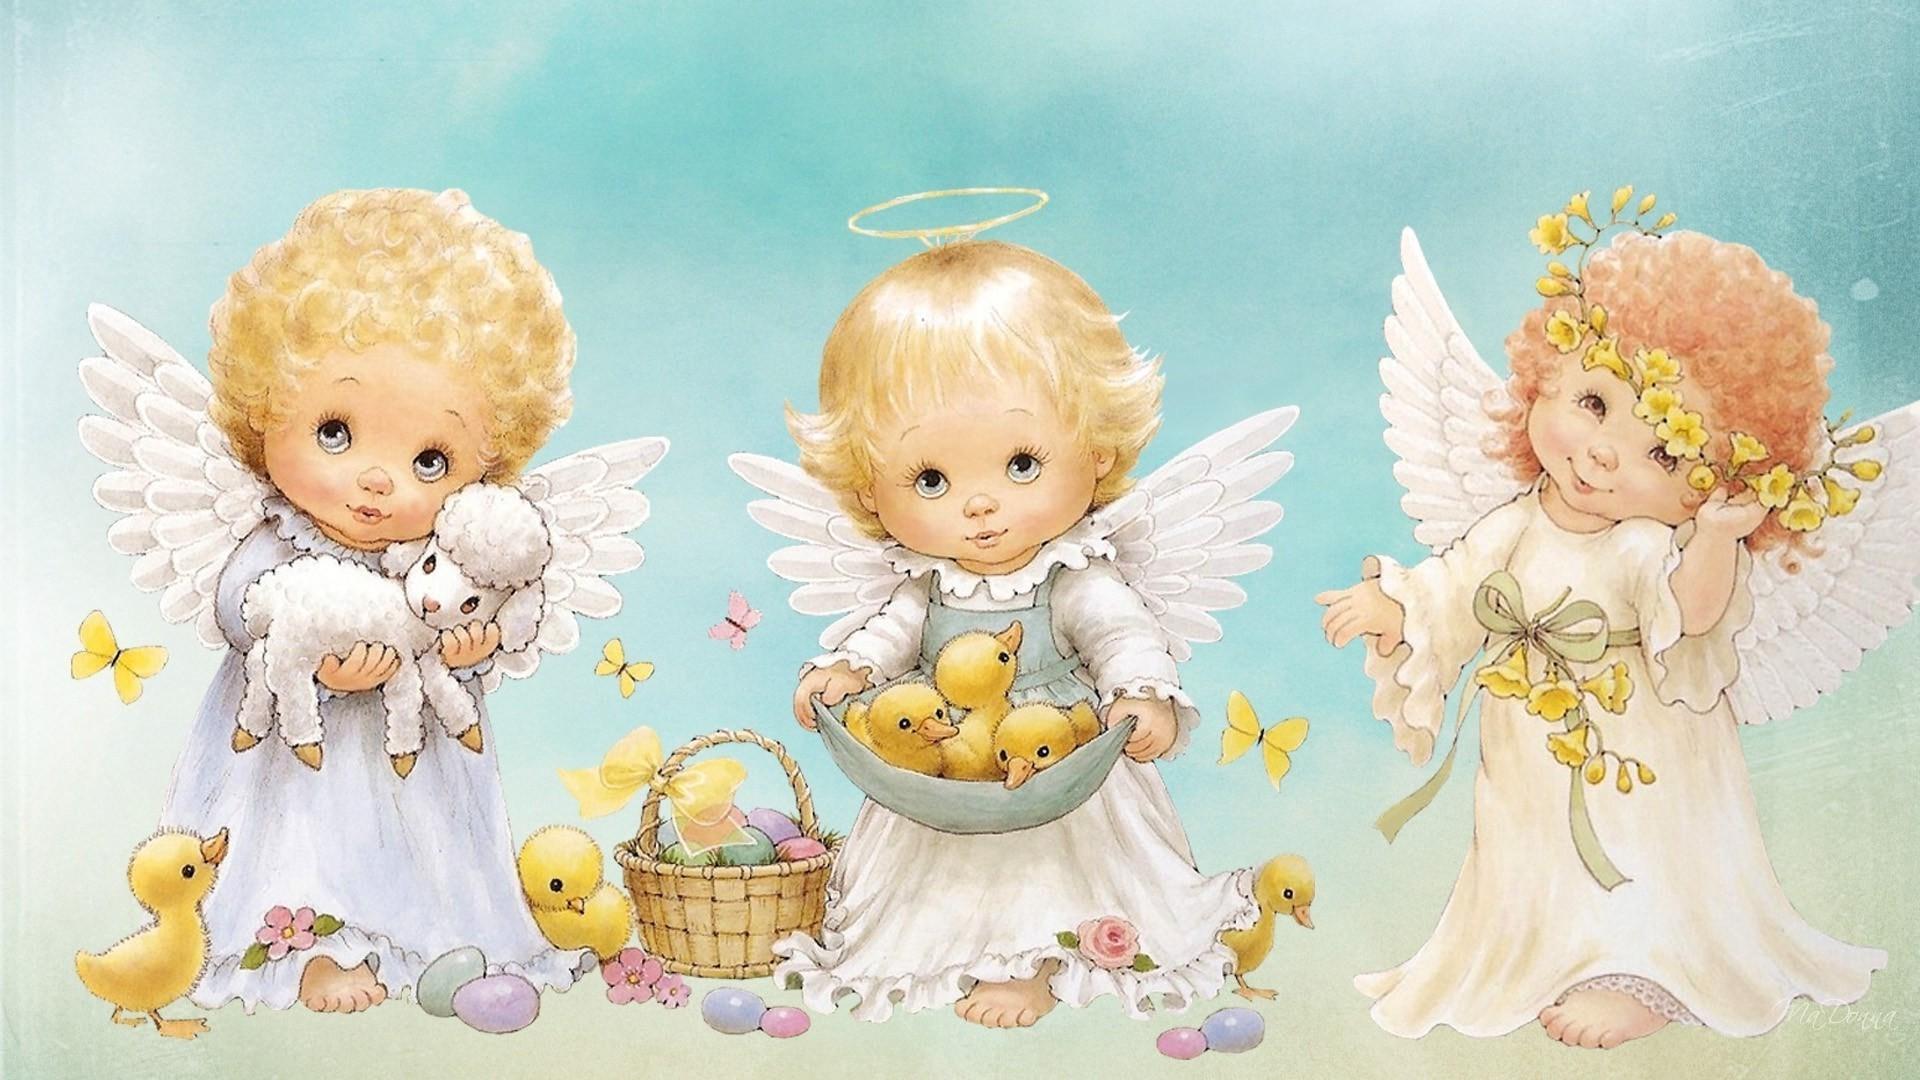 Angels Images Baby Angels Hd Wallpaper And Background Photos 8185775 9f2